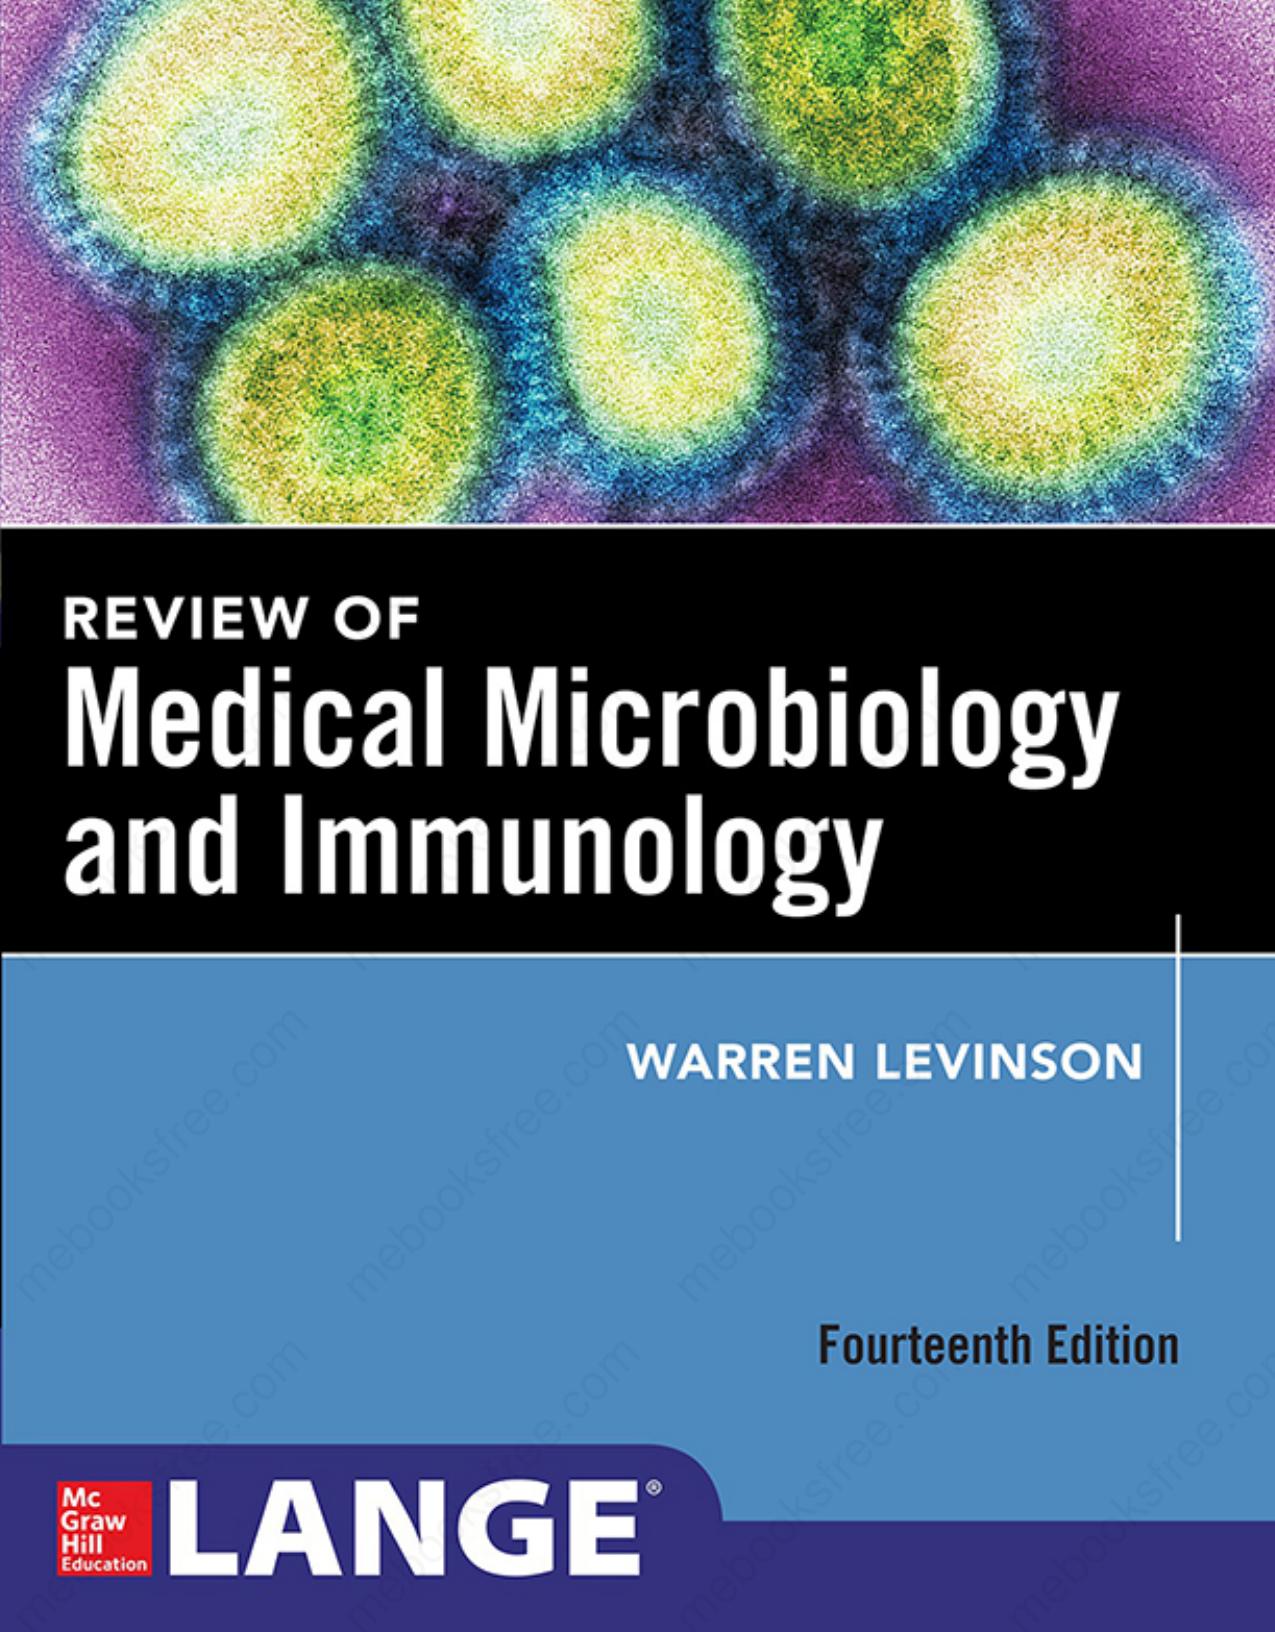 Review of Medical Microbiology and Immunology 2016